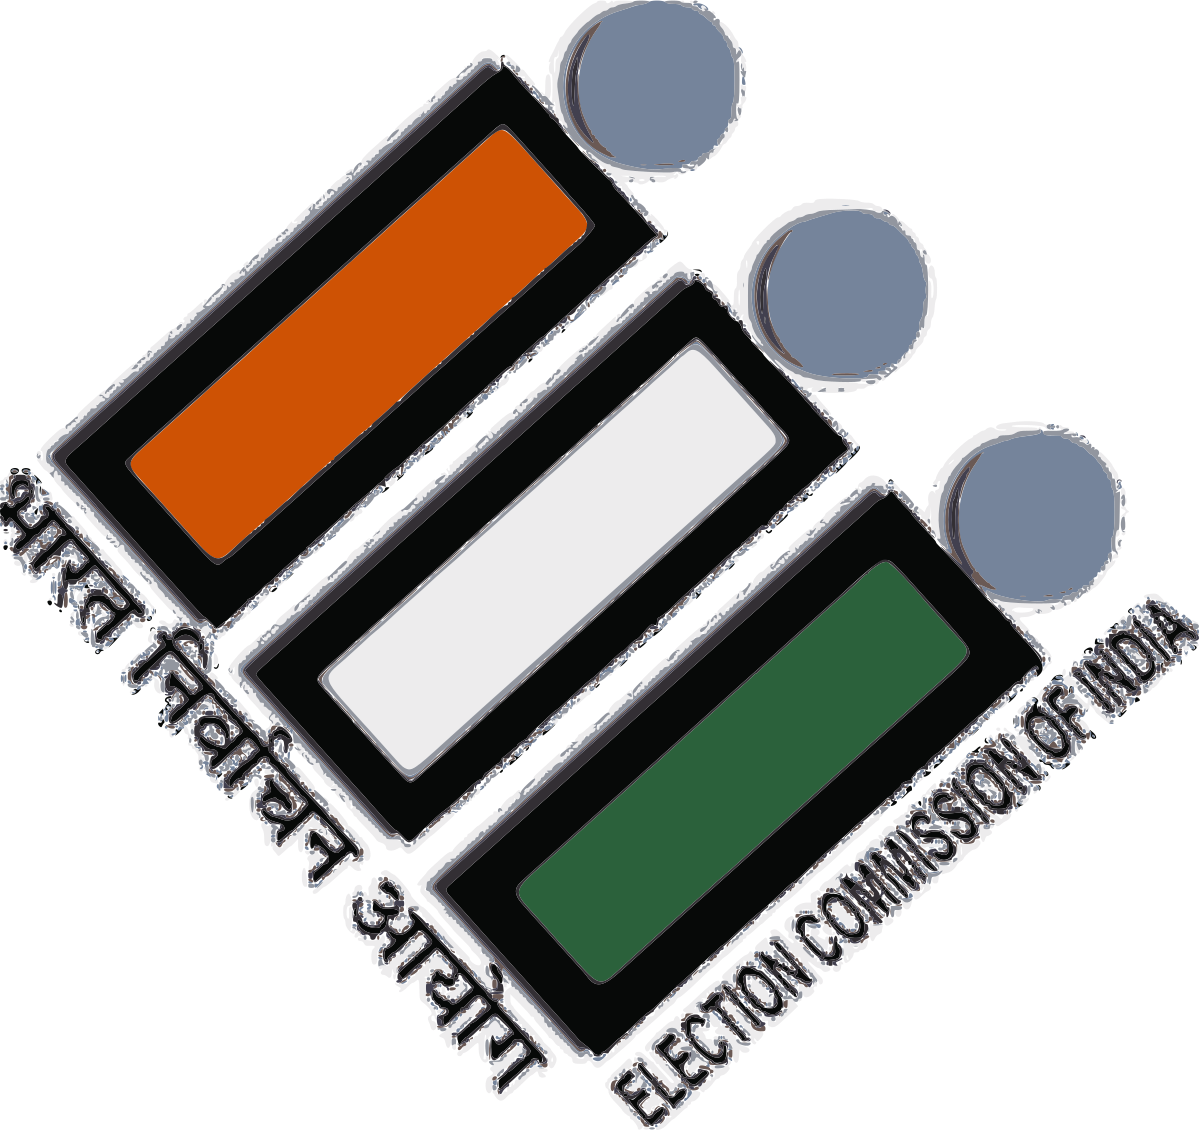 Election_Commission_of_India_logo.svg.png